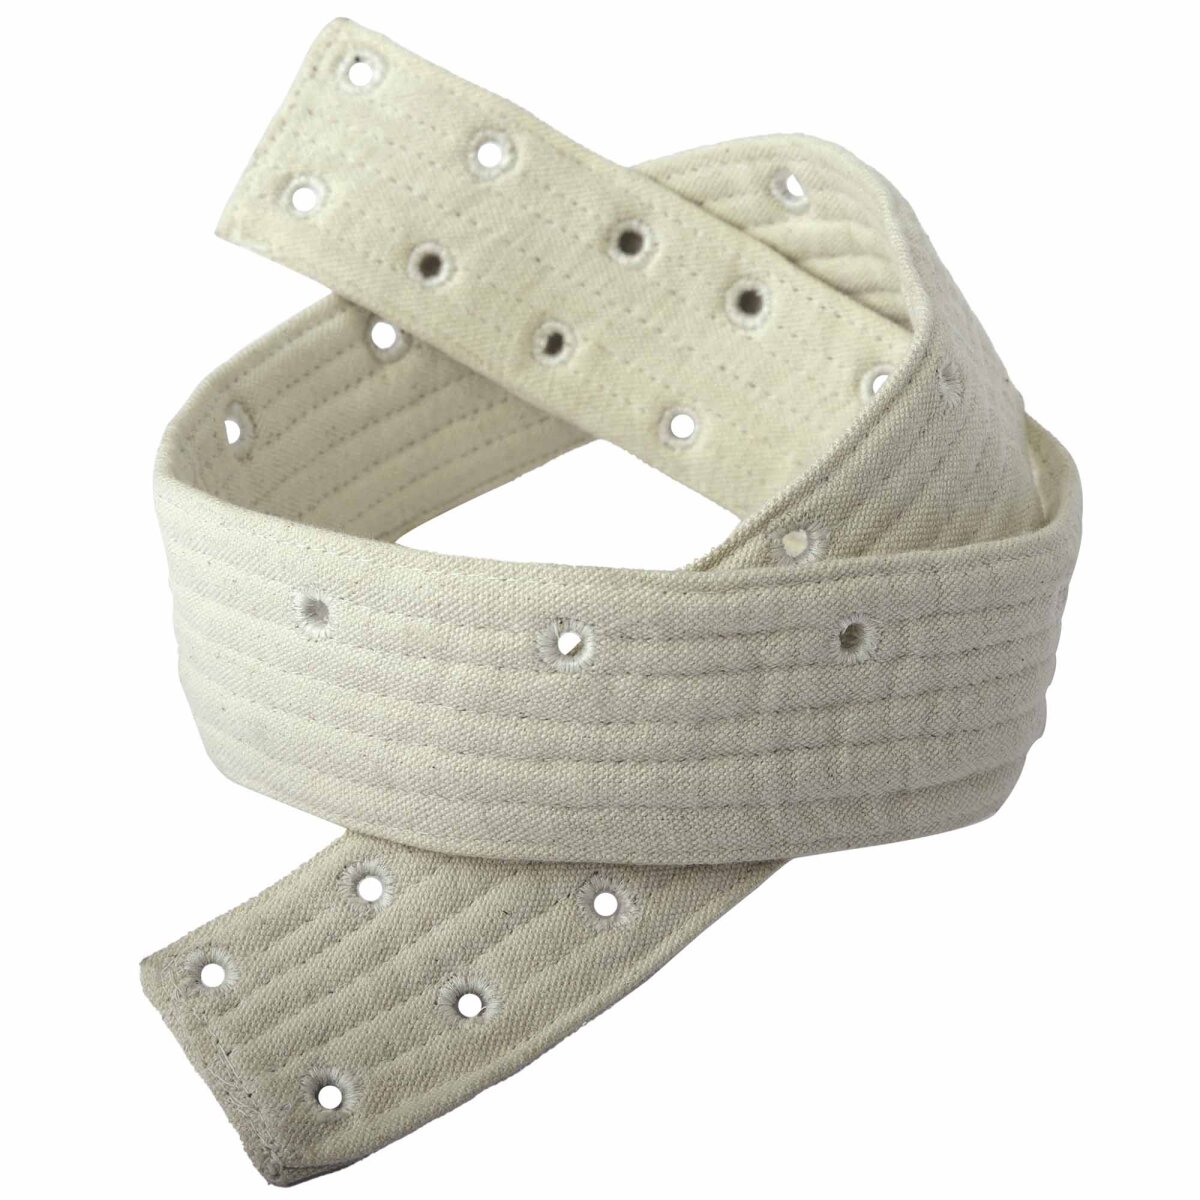 Medieval Padded Arming Belt Handmade from Sturdy Canvas...